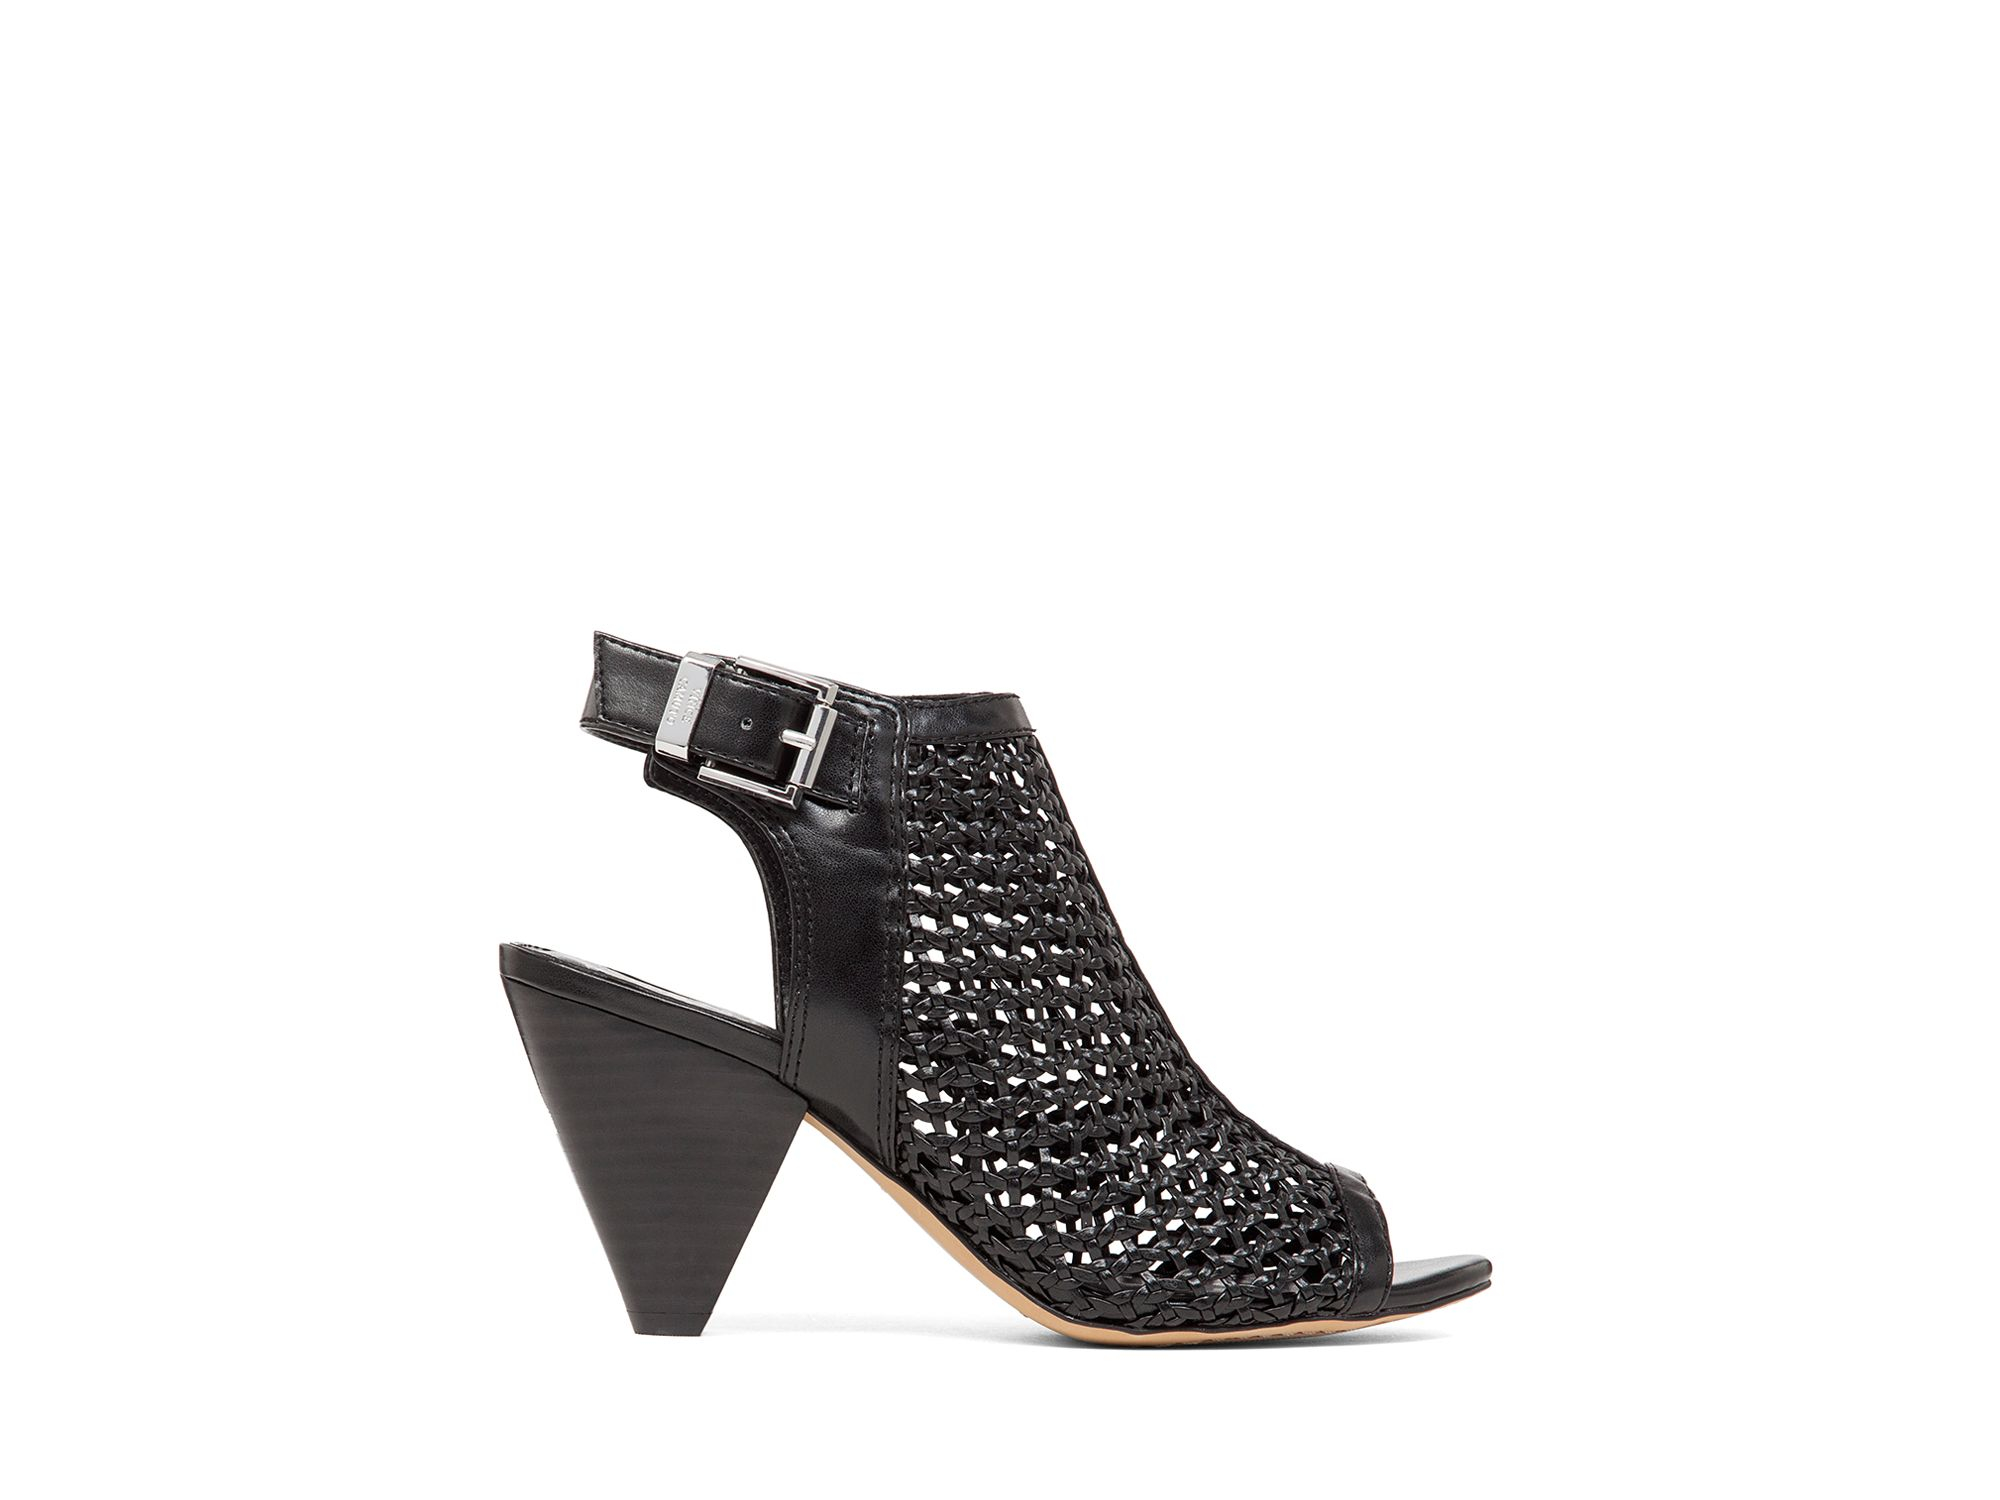 Vince camuto Open Toe Booties - Emilia Perforated in Black | Lyst